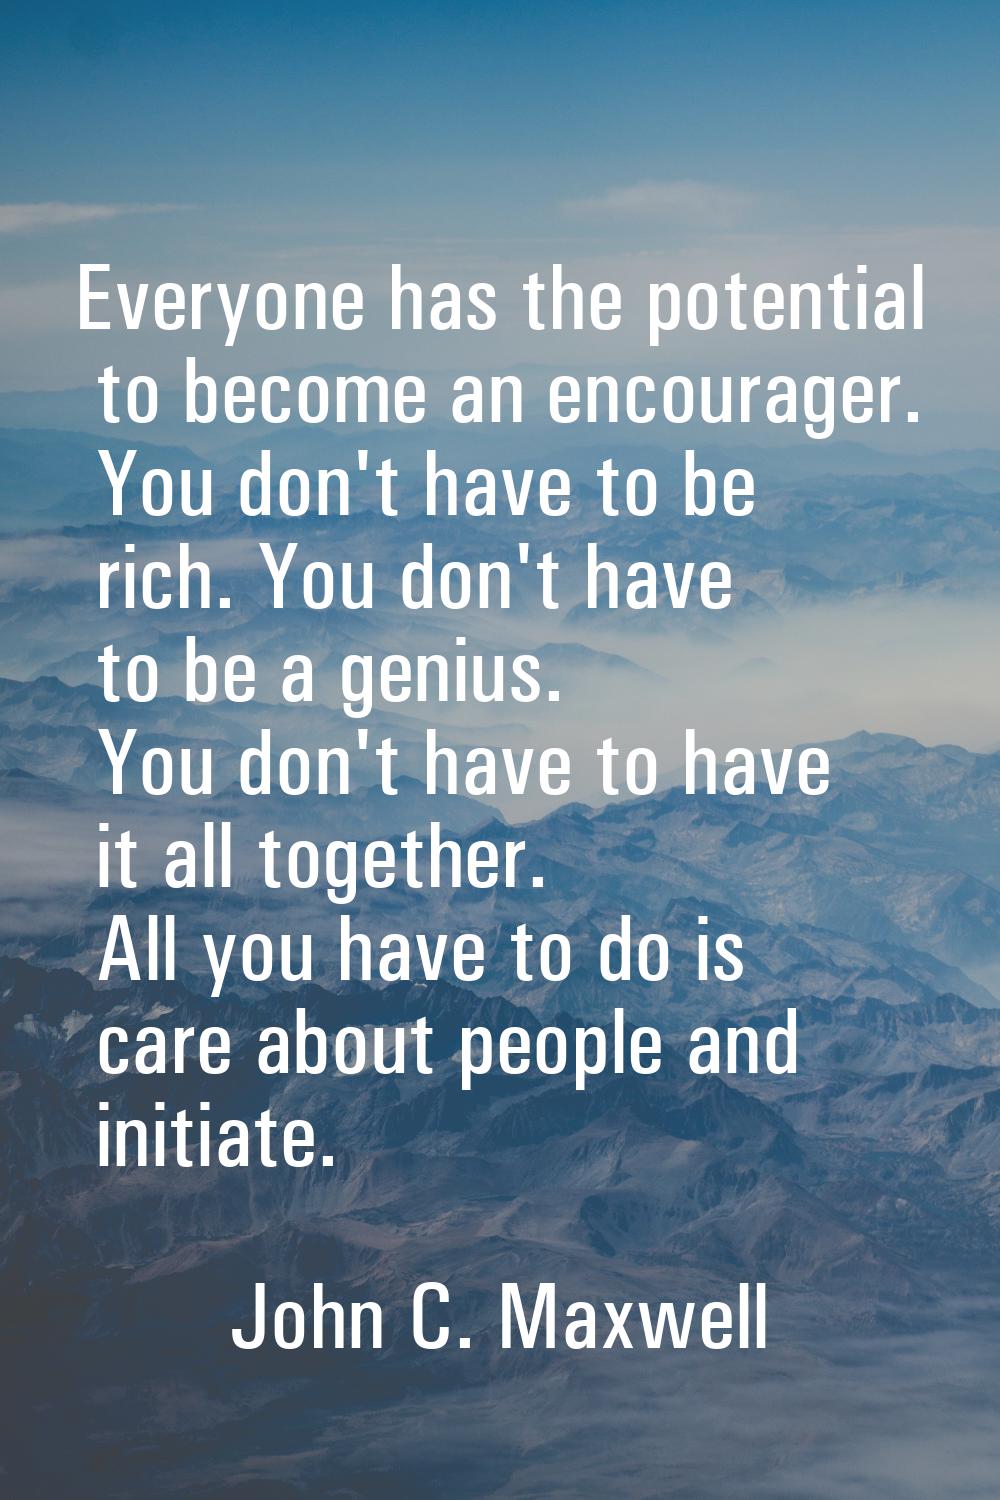 Everyone has the potential to become an encourager. You don't have to be rich. You don't have to be